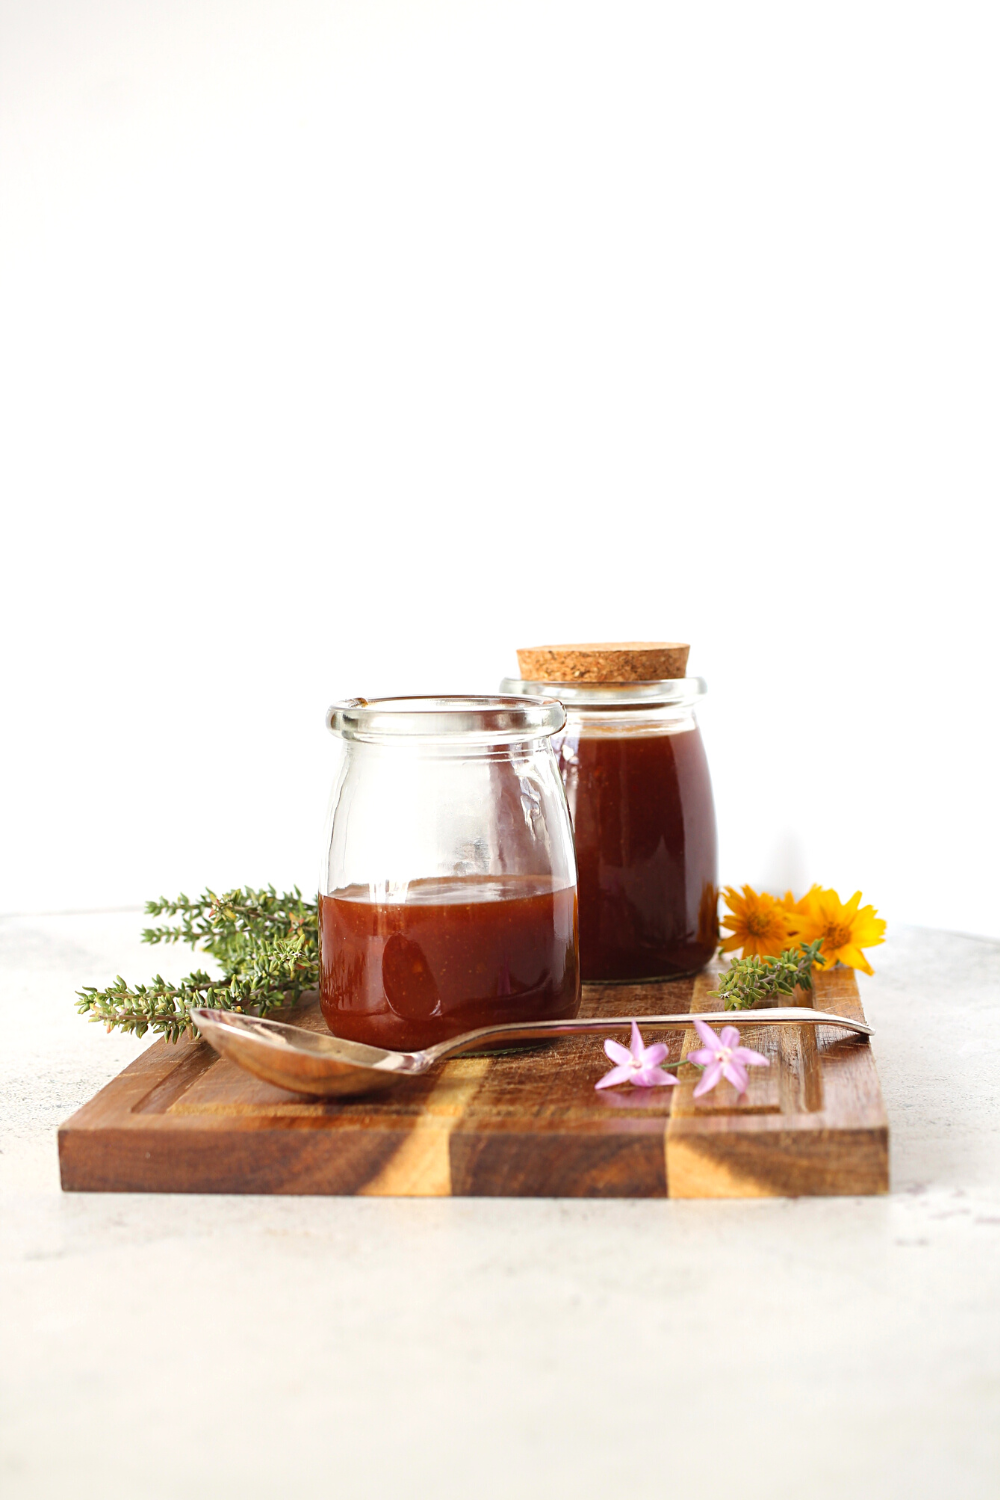 the best homemade sugar-free bbq sauce that can be made in under 15 minutes and stored in jars for up to 2 weeks